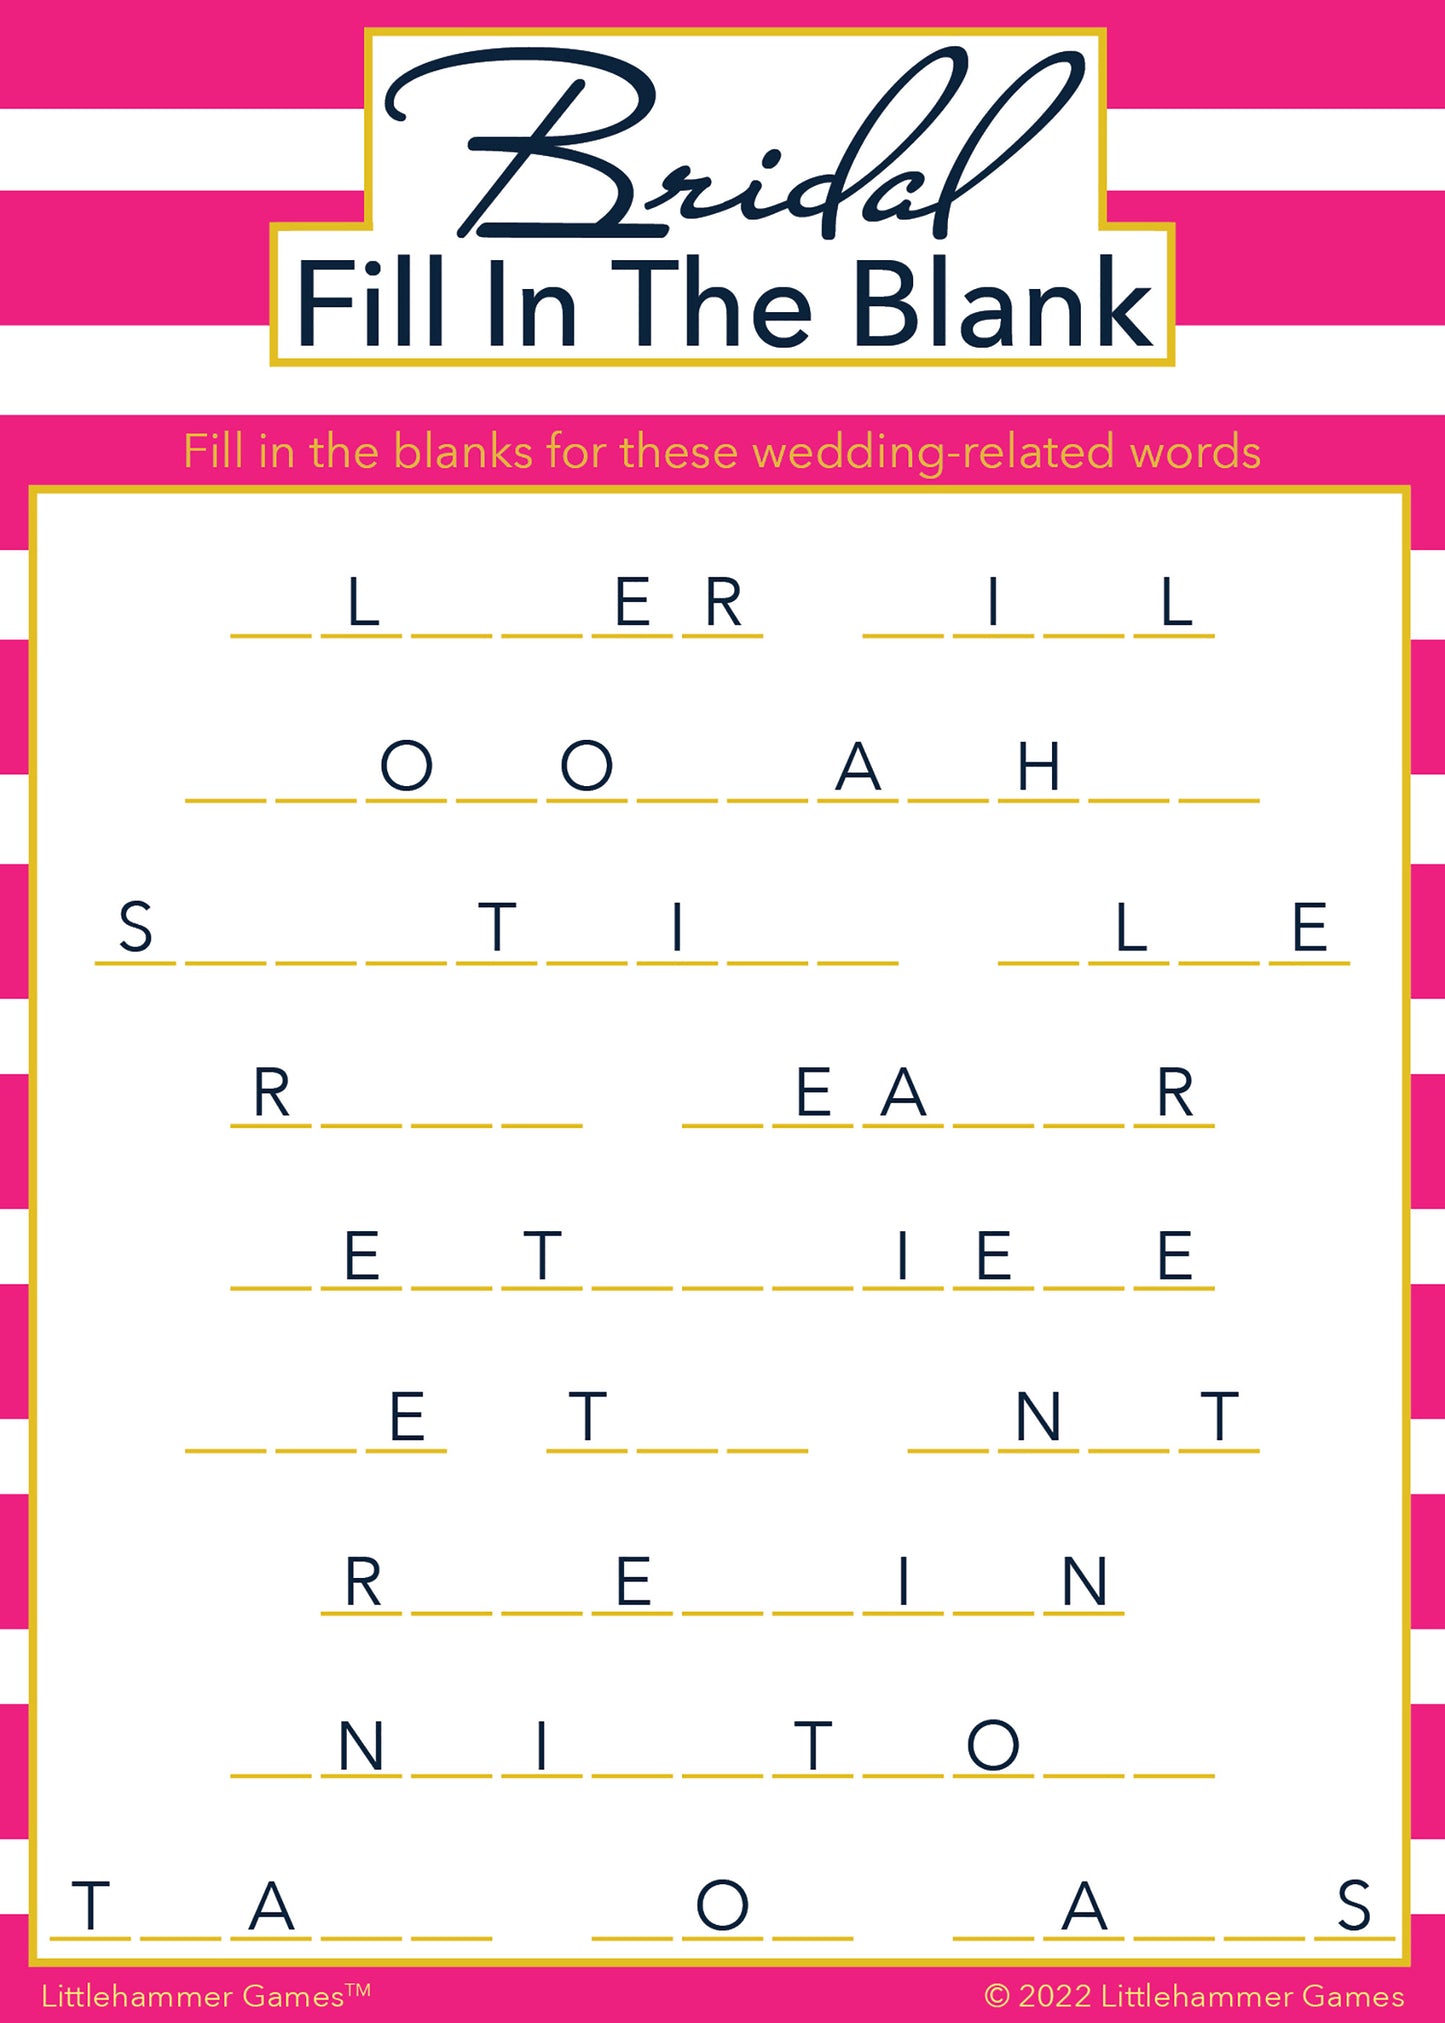 Bridal Fill in the Blank game card with a pink-striped background